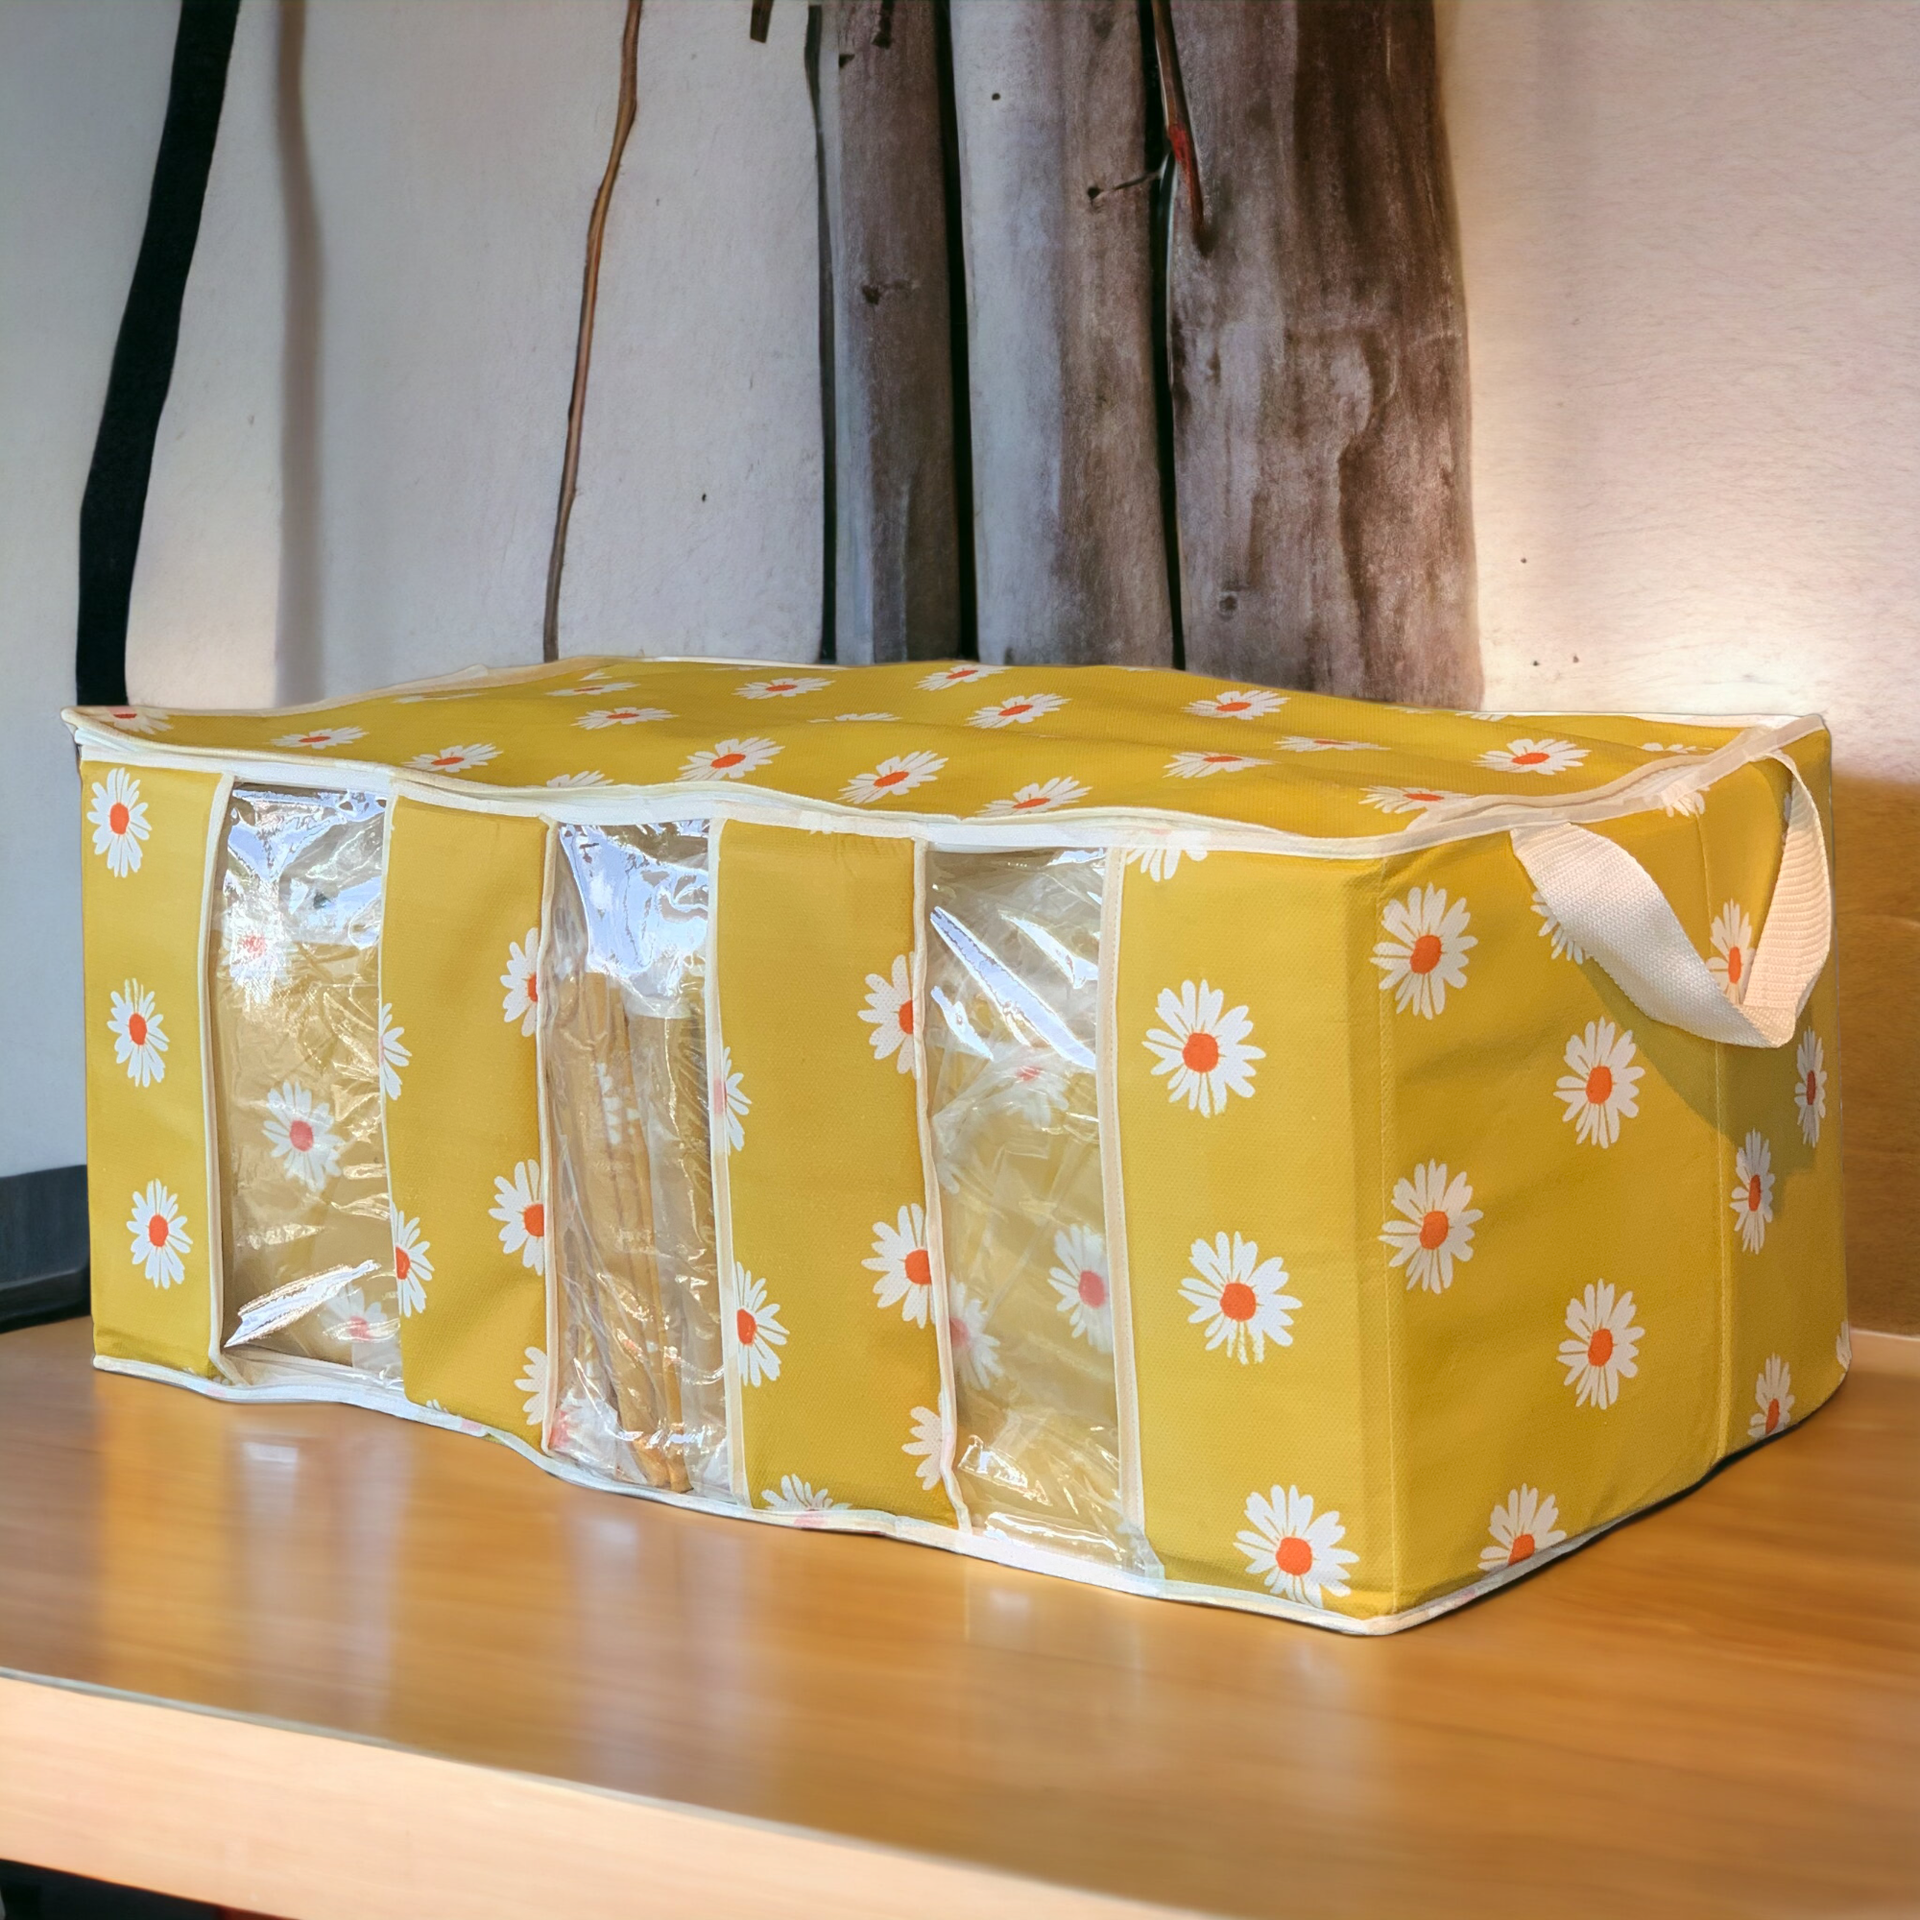 3 COMPARTMENT BAG -YELLOW FLOWER PRINTED